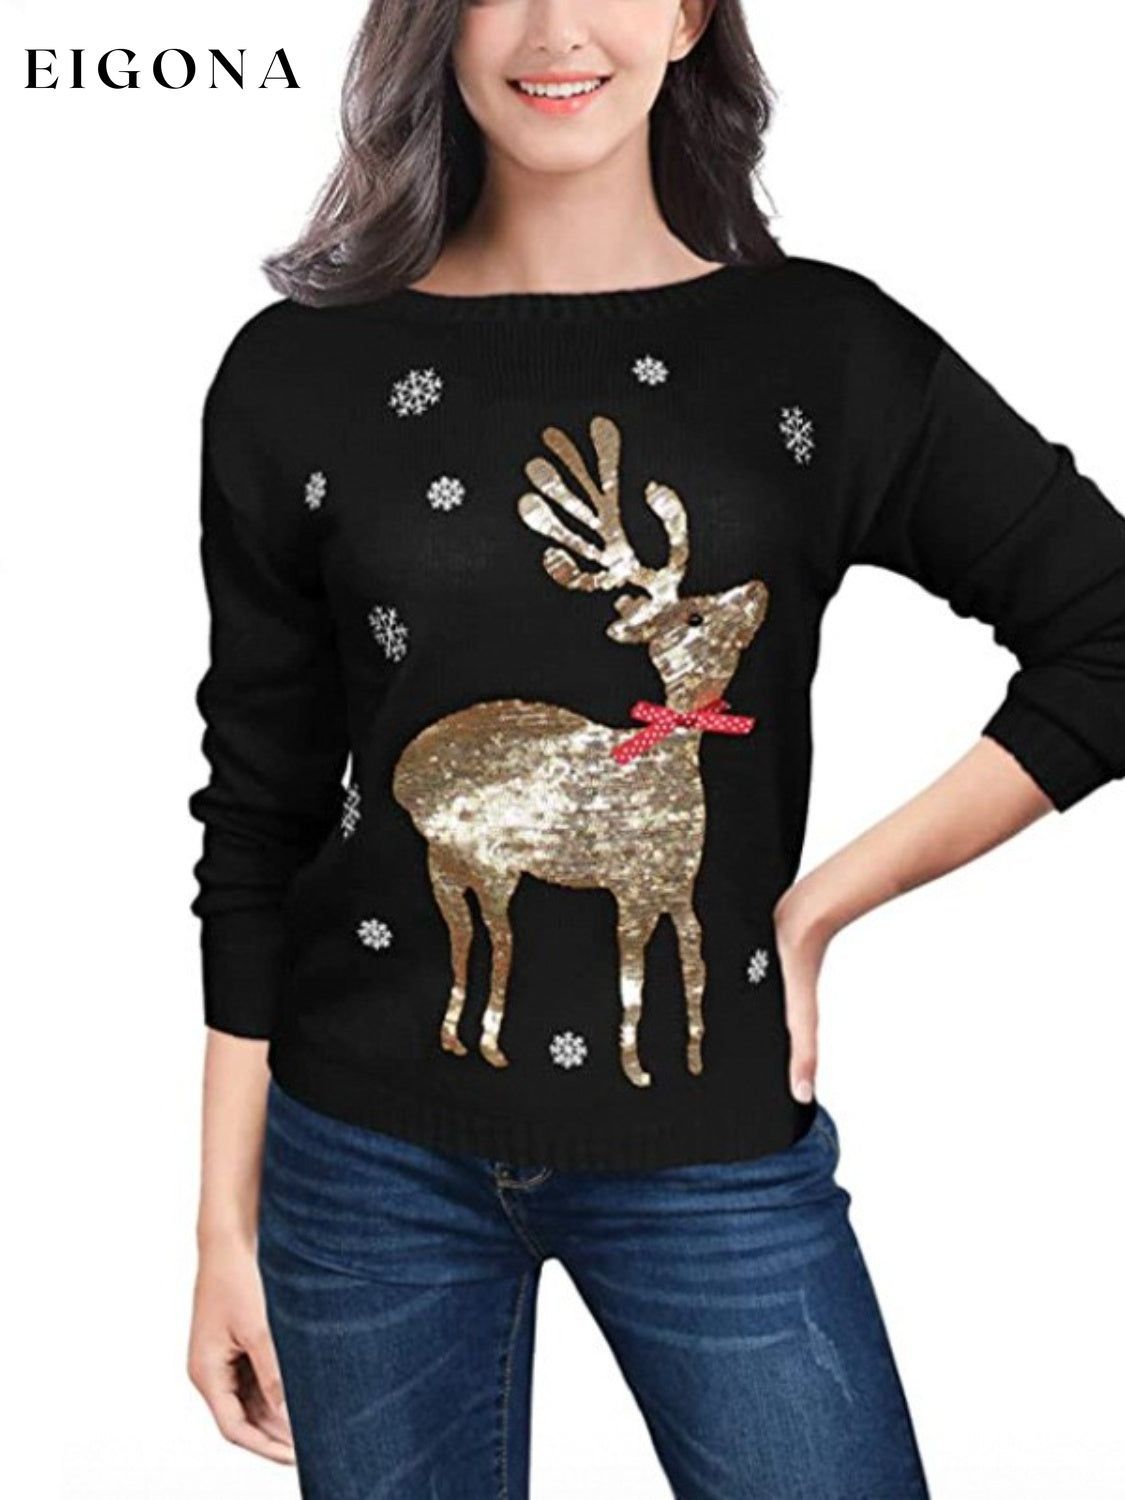 Sequin Reindeer Graphic Ugly Christmas Sweater Black C.J@MZ christmas sweater clothes holiday sweater holiday sweaters Ship From Overseas